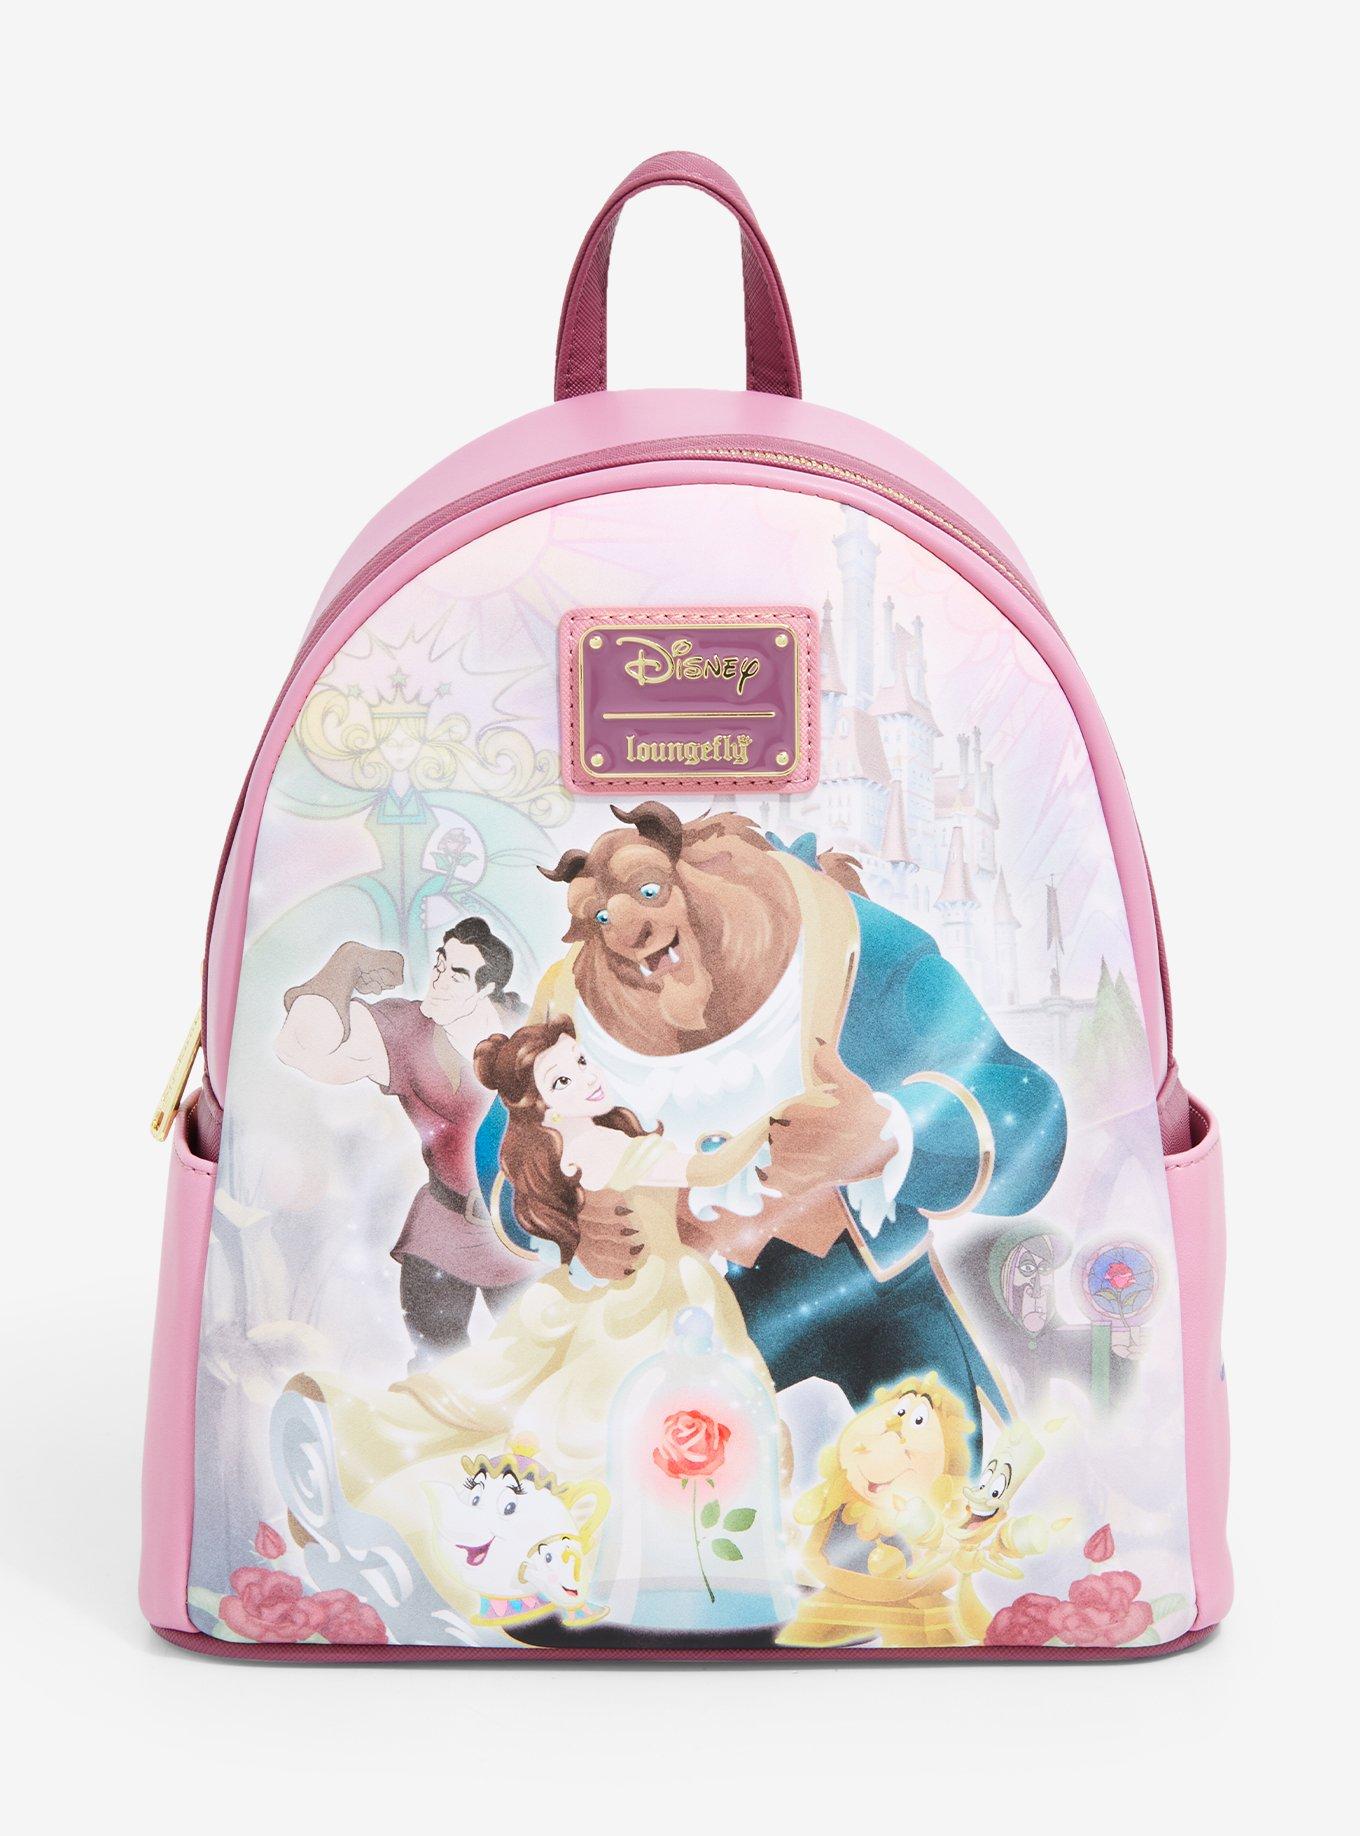 New Disney Store Belle Backpack Lunch Tote Box Book Bag Beauty and the Beast